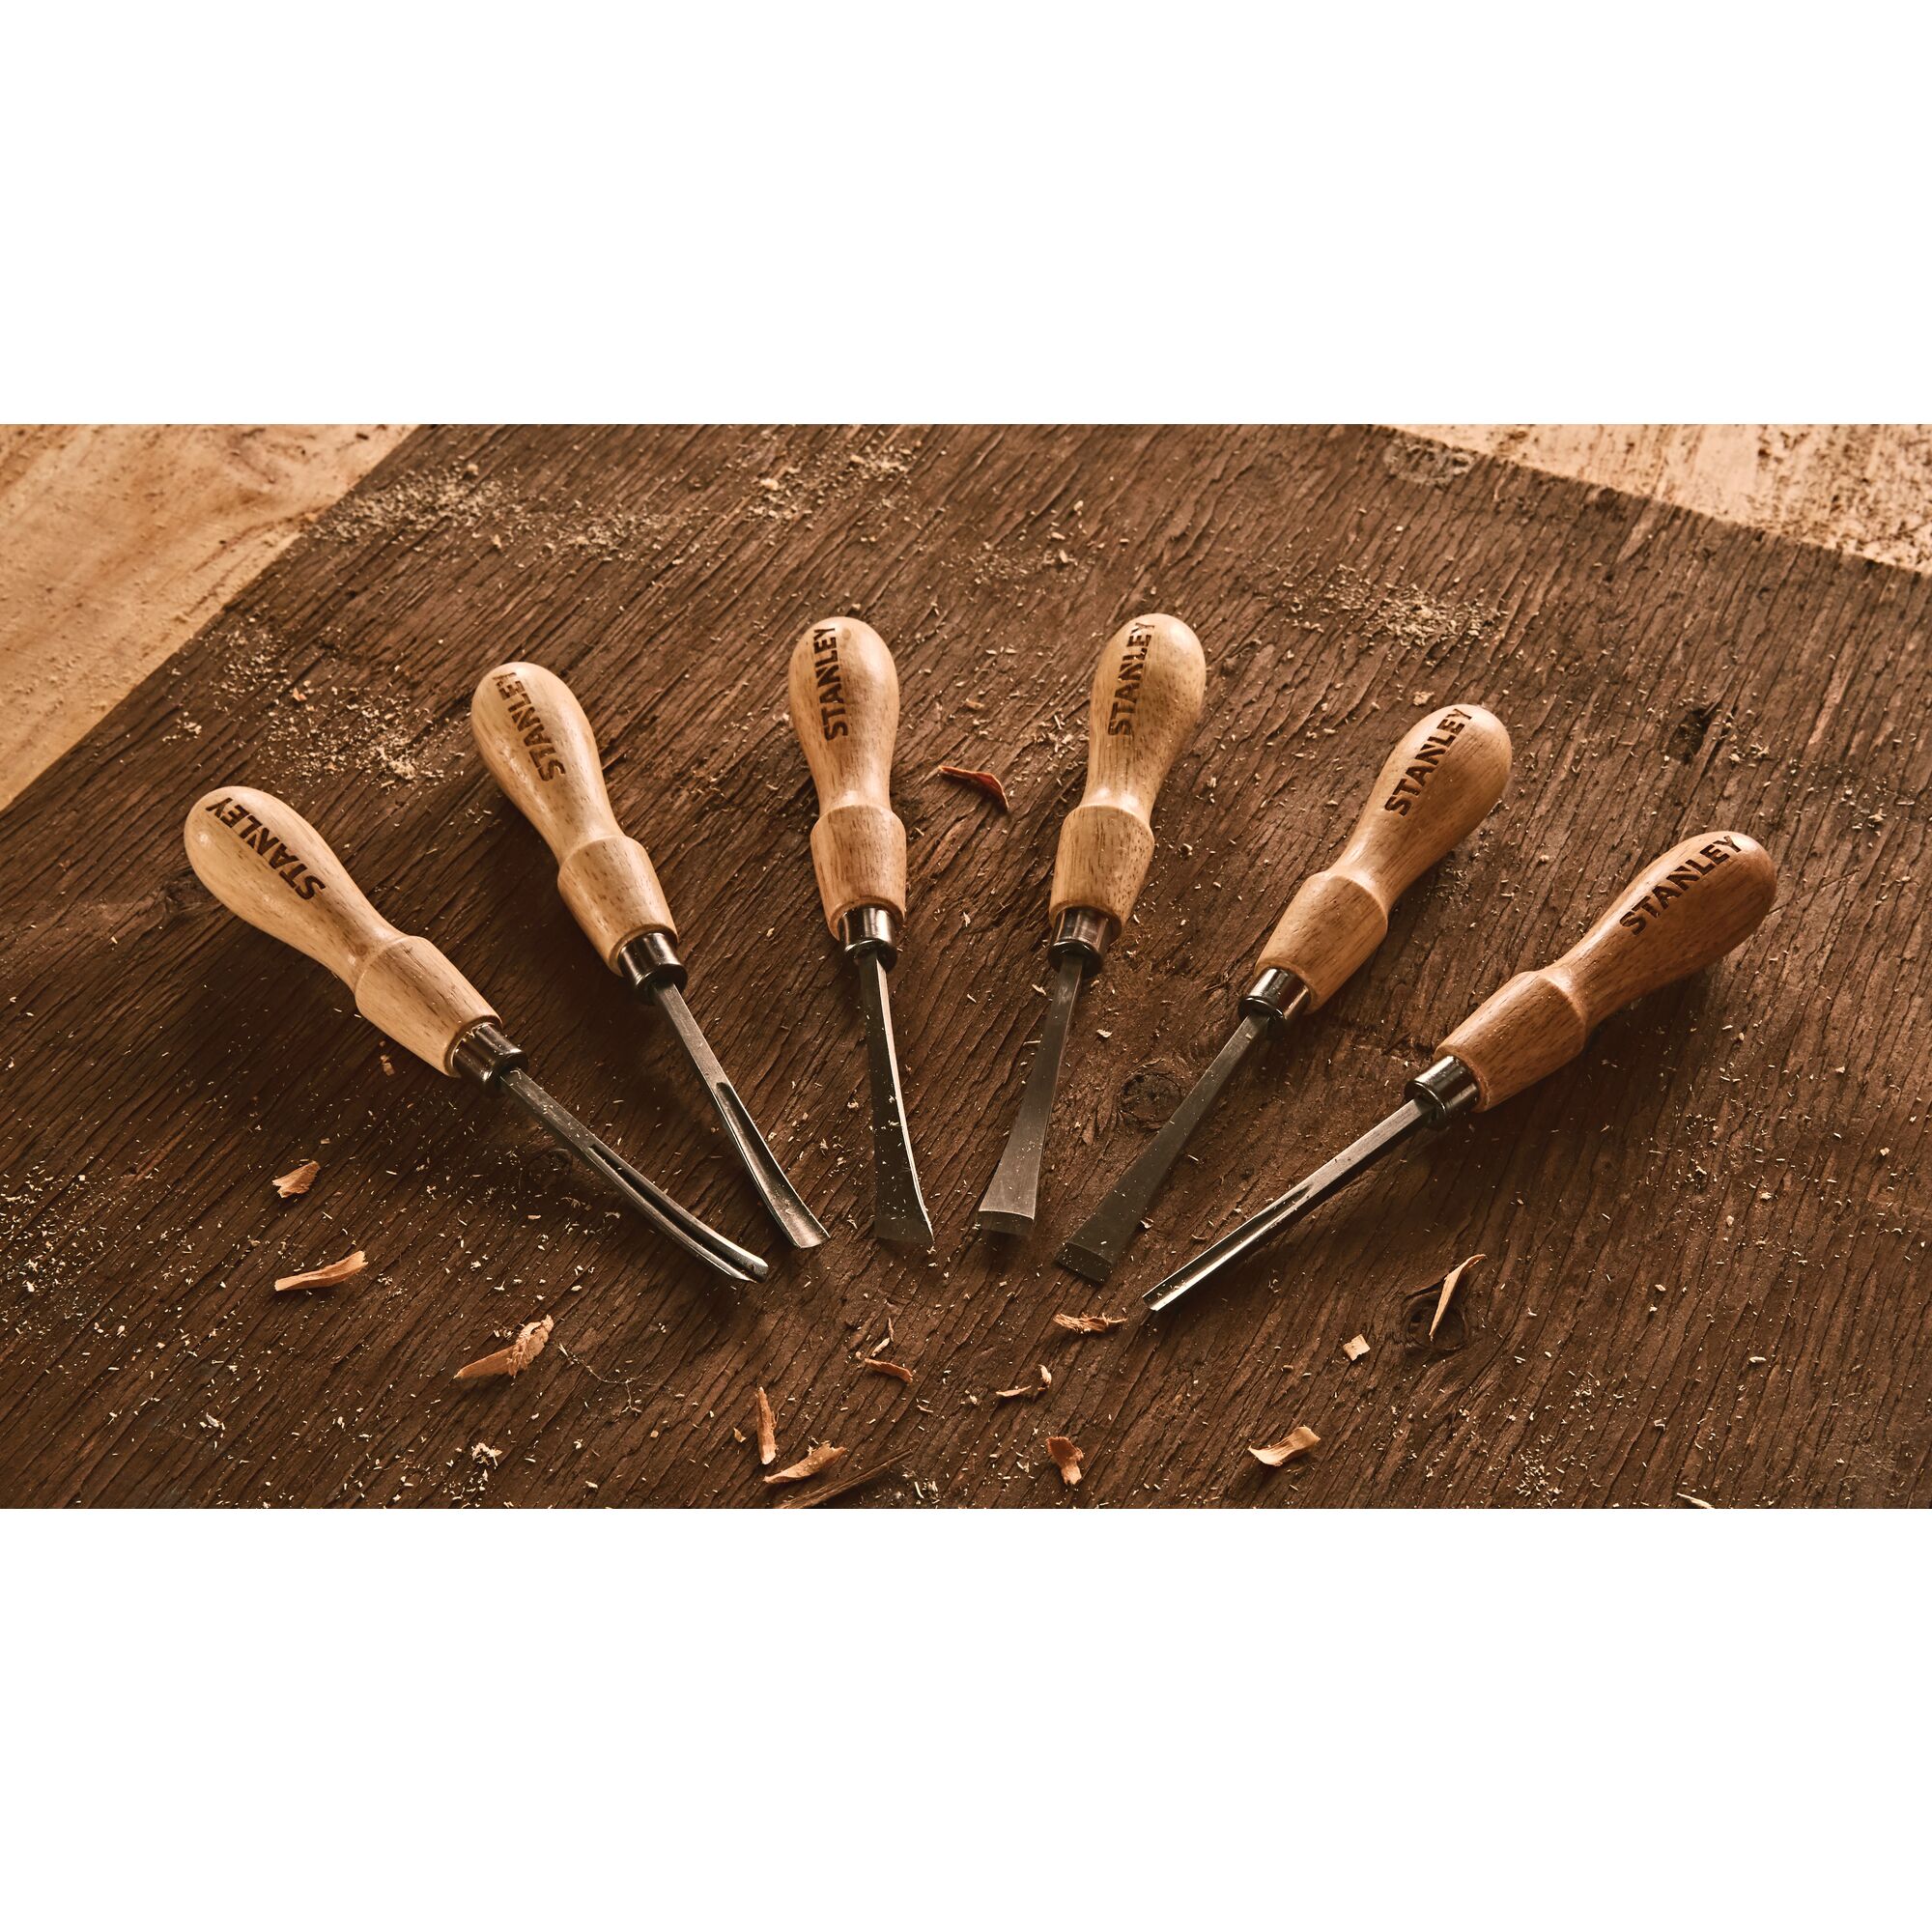 6 Piece Wood Carving Chisel Set with Holder wood gouge & Parting Tools 